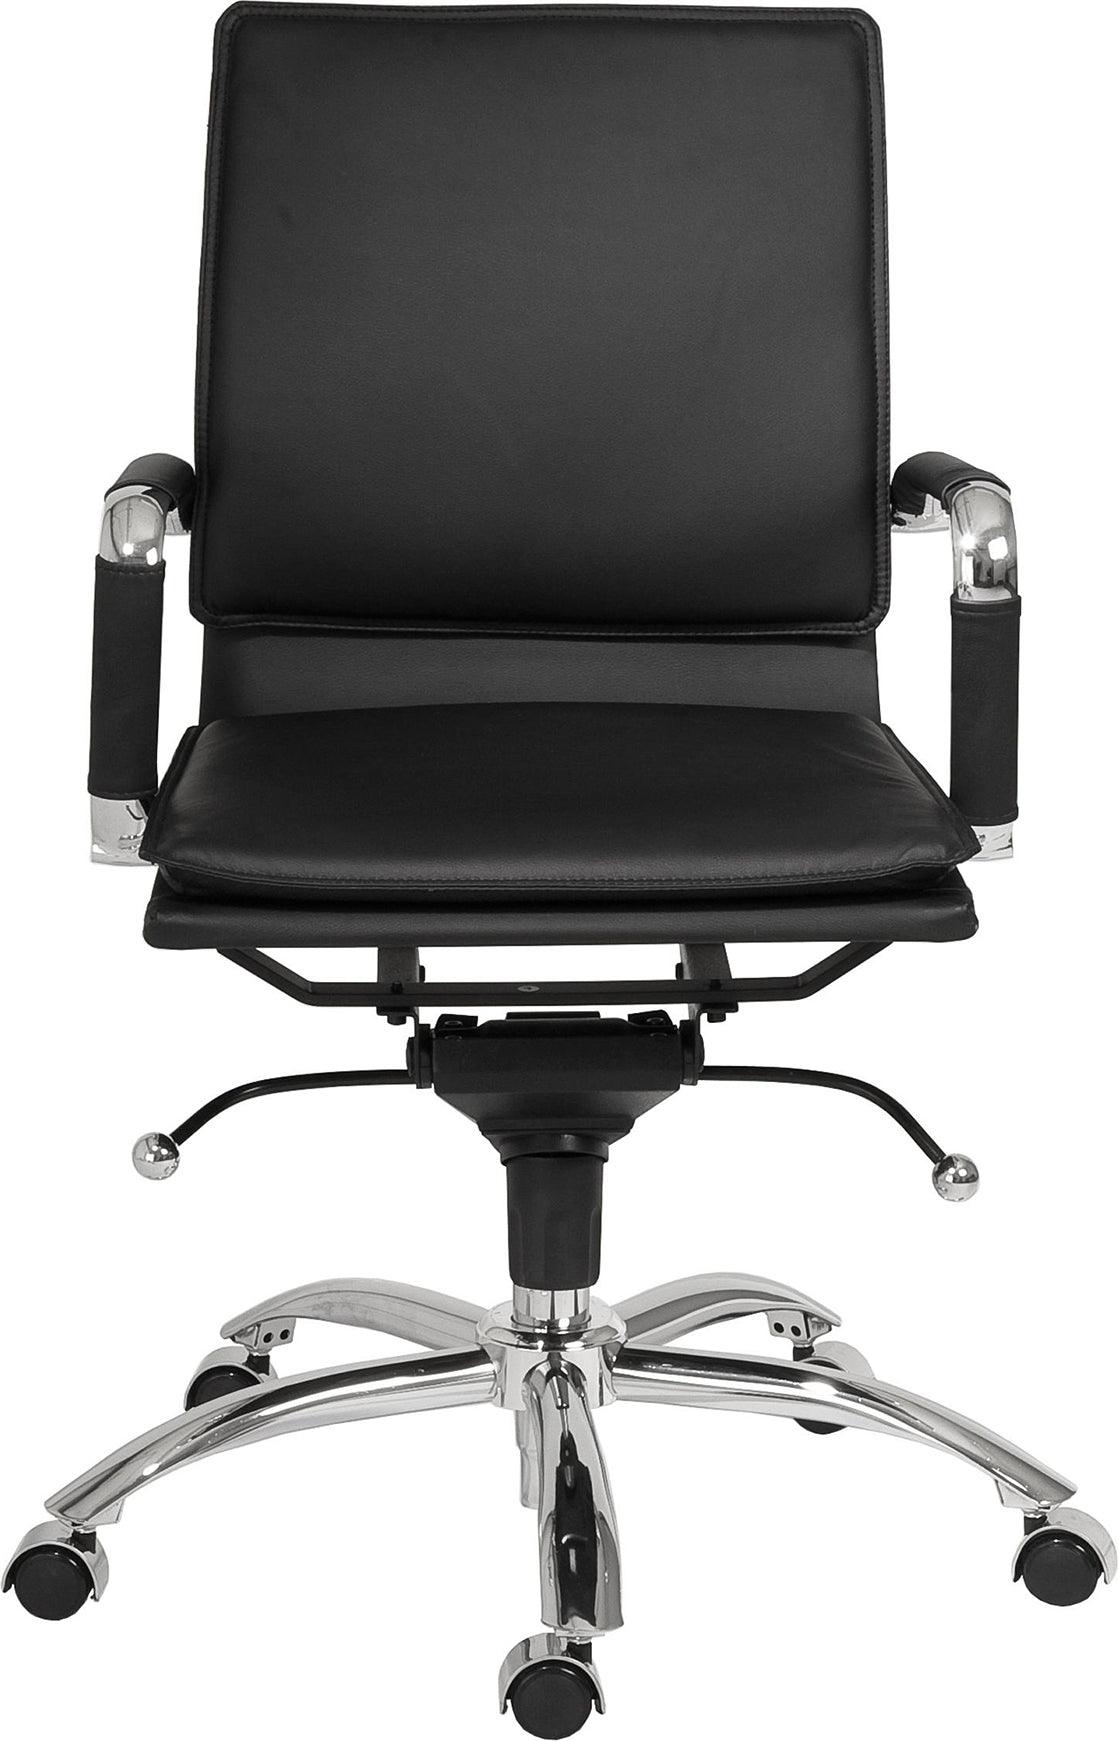 Euro Style Task Chairs - Gunar Pro Low Back Office Chair Black